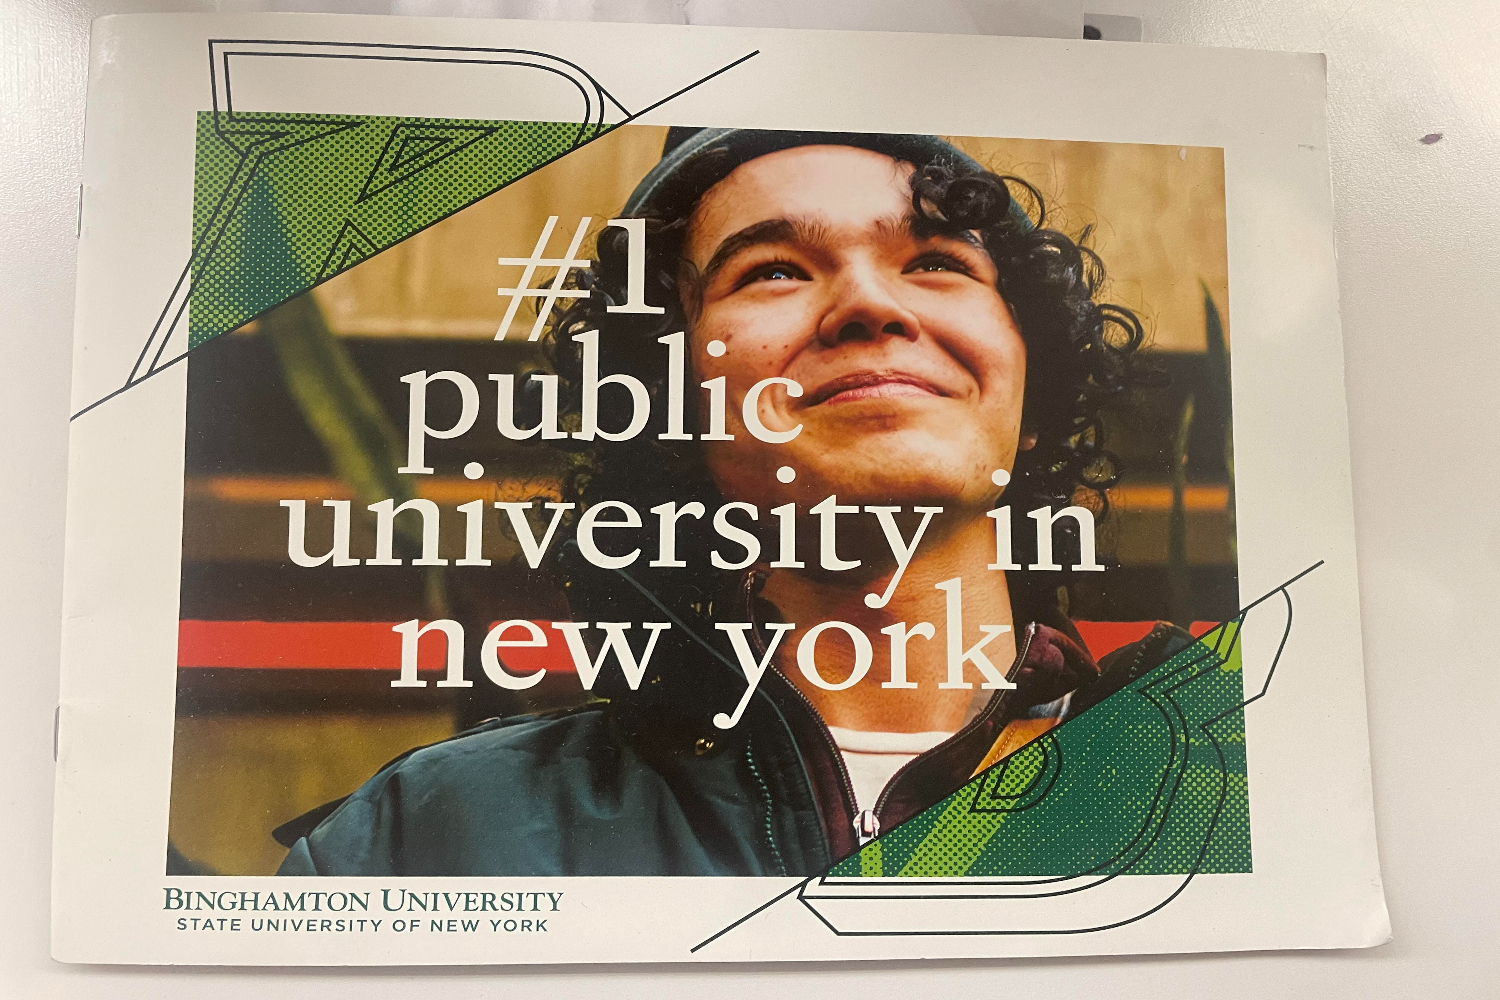 The Binghamton University pamphlet passed around by college representatives during their visit.
